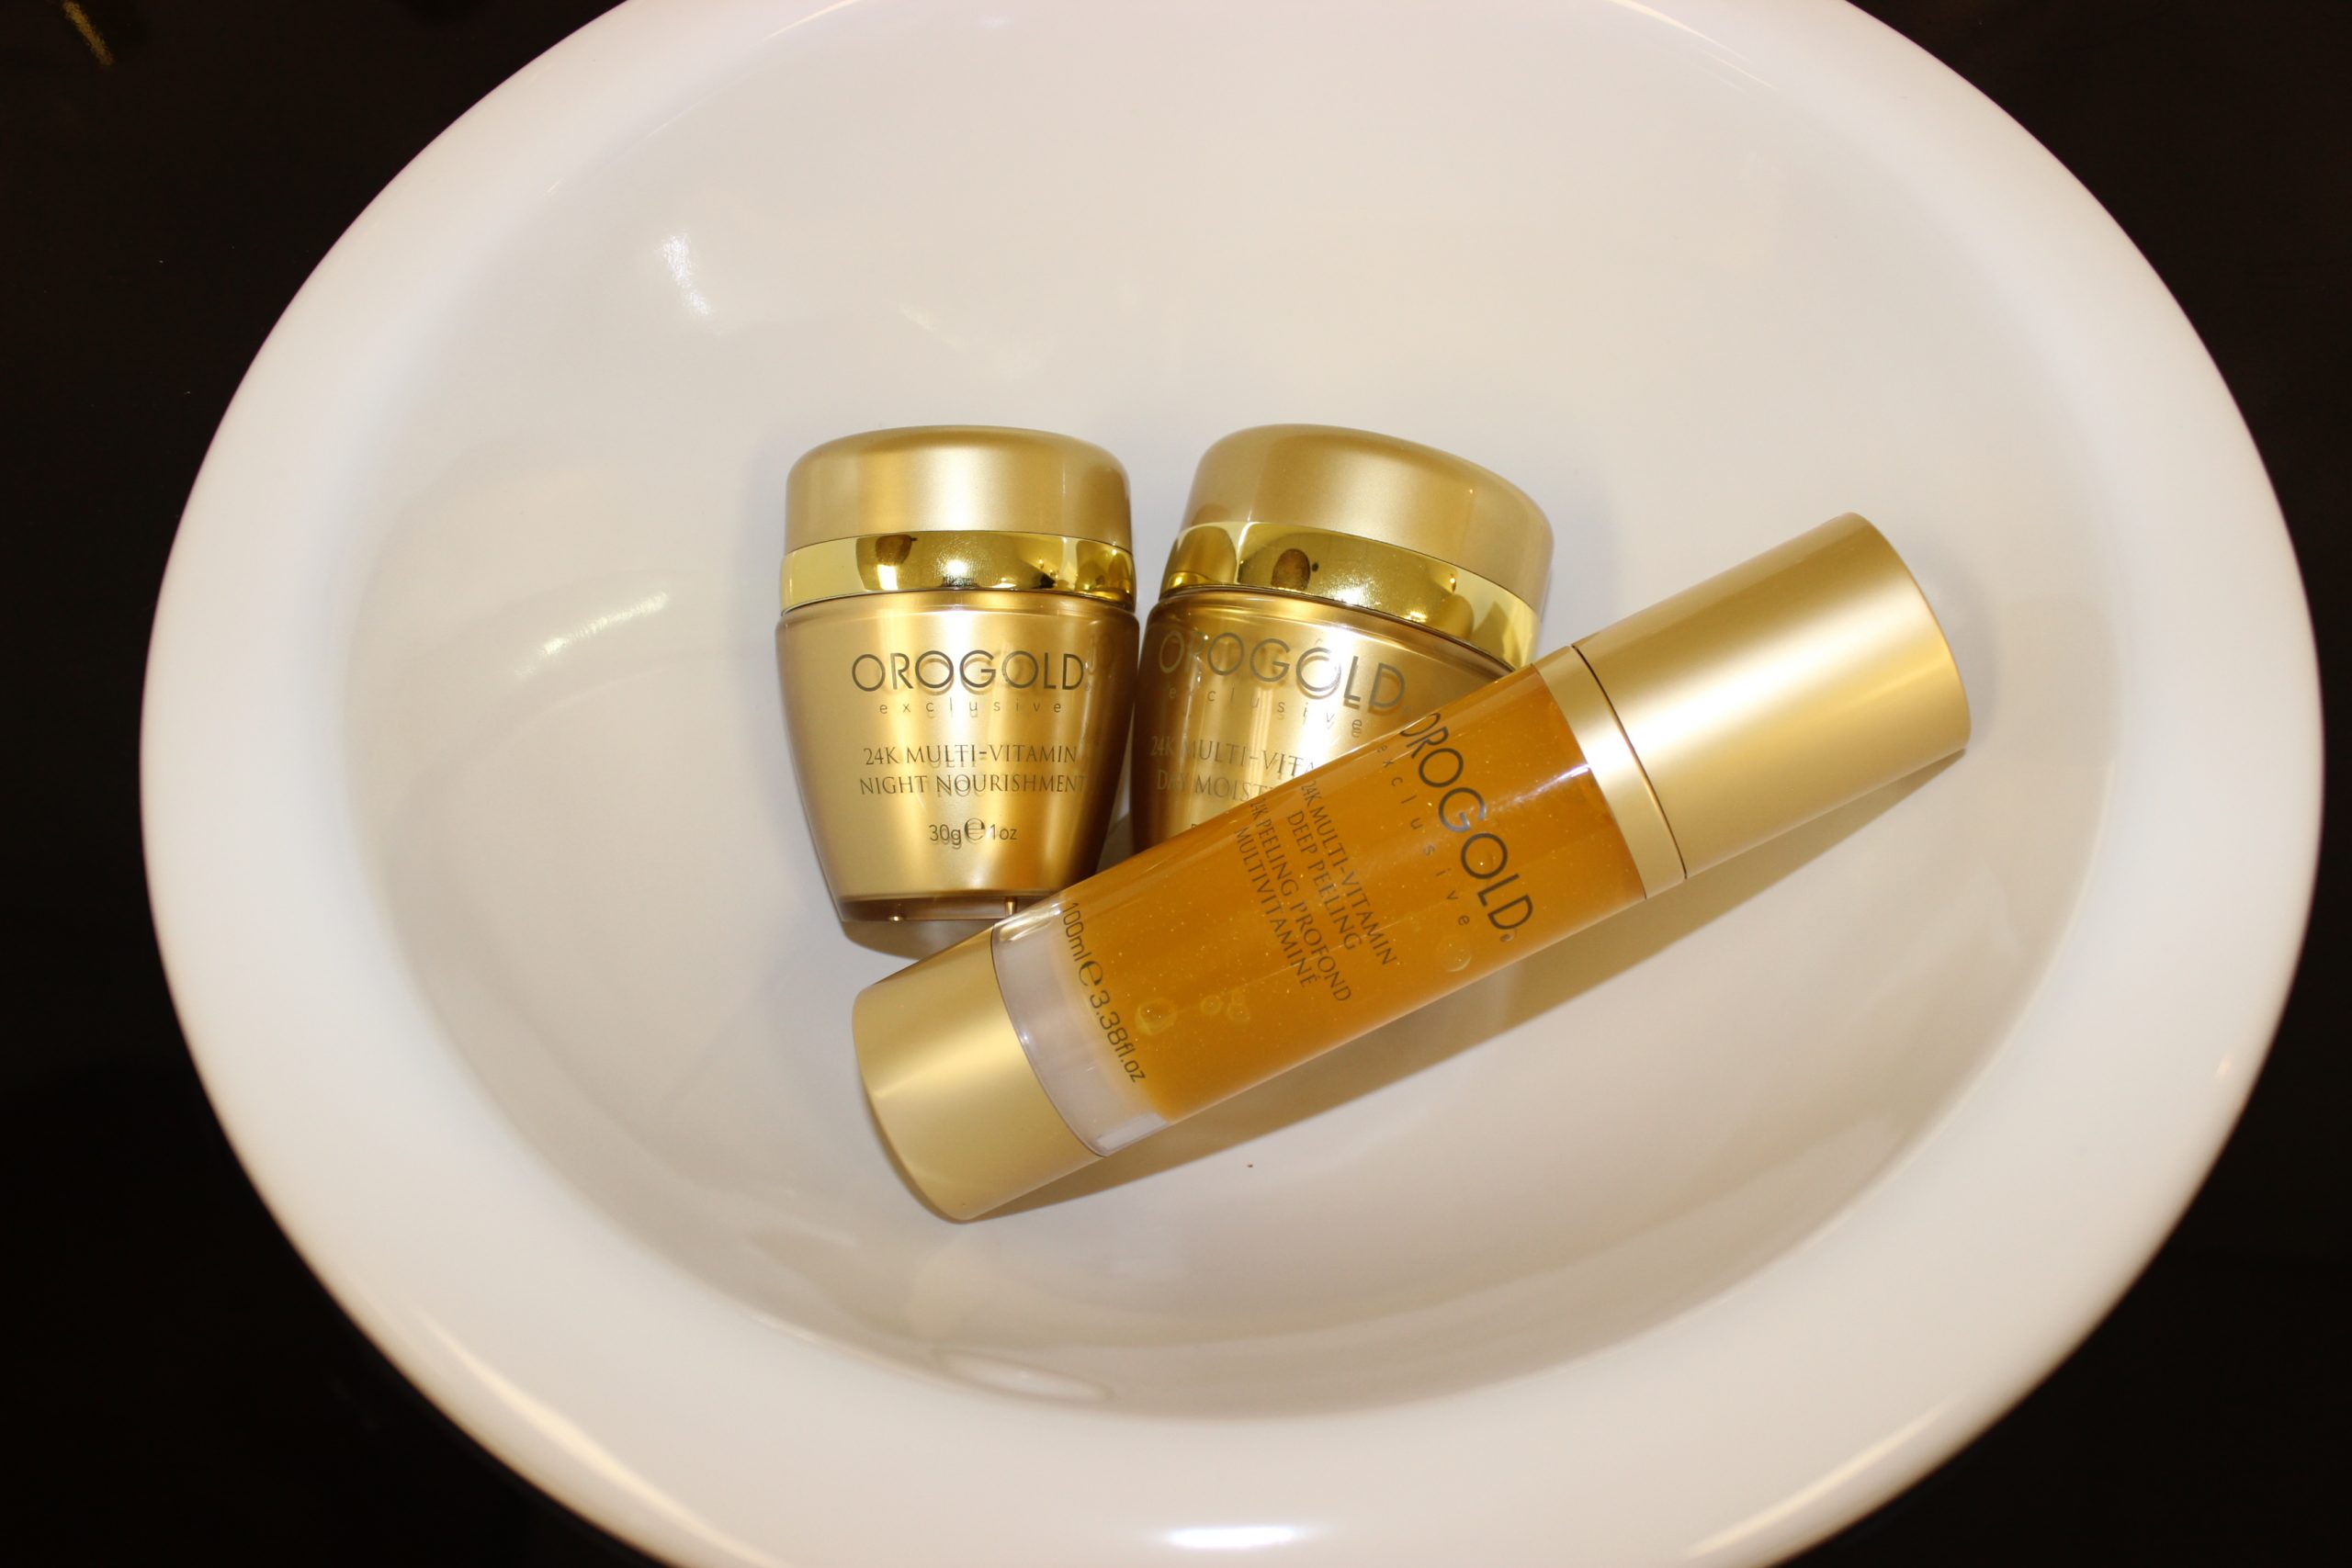 Orogold 24K Multi-Vitamin Collection Review - Health Articles à Orogold Cosmetics Review 